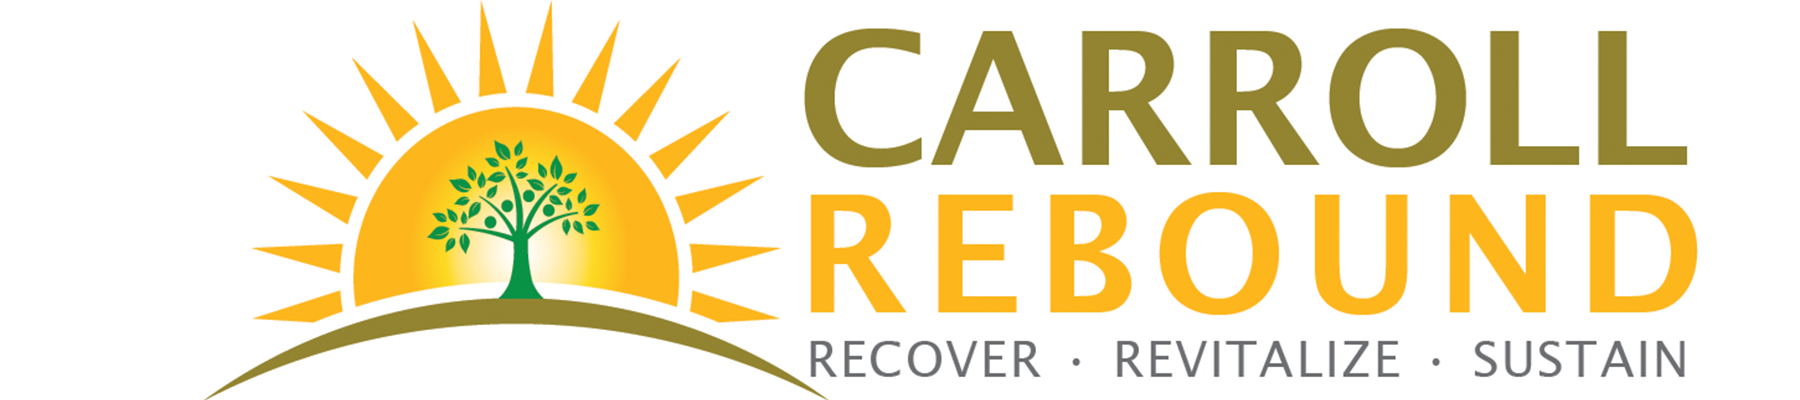 Business Assistance Grant Update  Carroll Rebound II – Retail is Now Closed Carroll County Restaurant Relief – Application Deadline is 12/8/20 at Noon